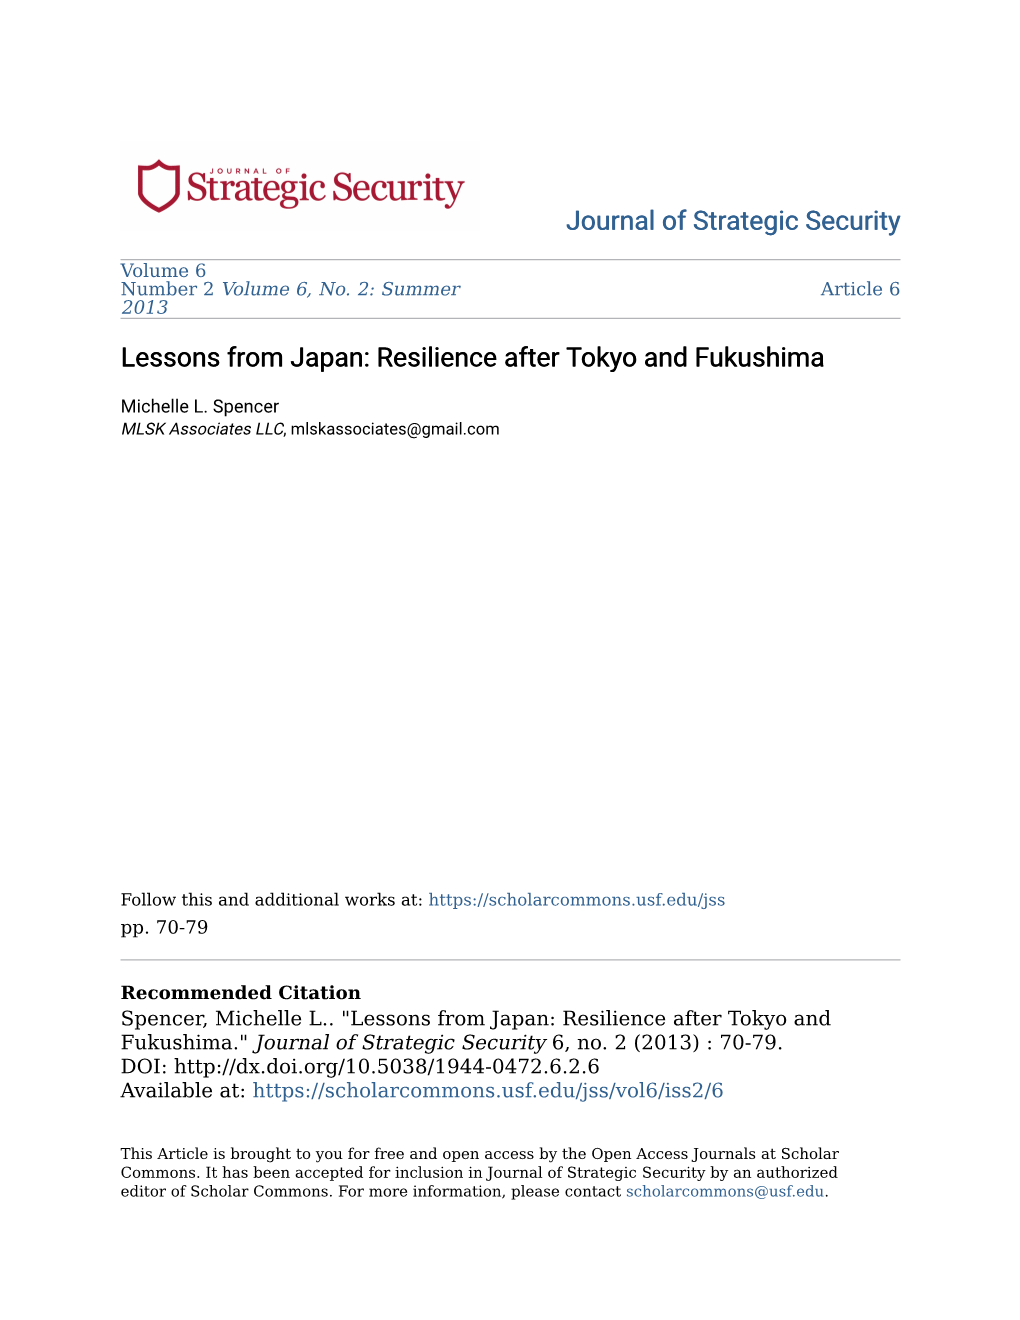 Lessons from Japan: Resilience After Tokyo and Fukushima